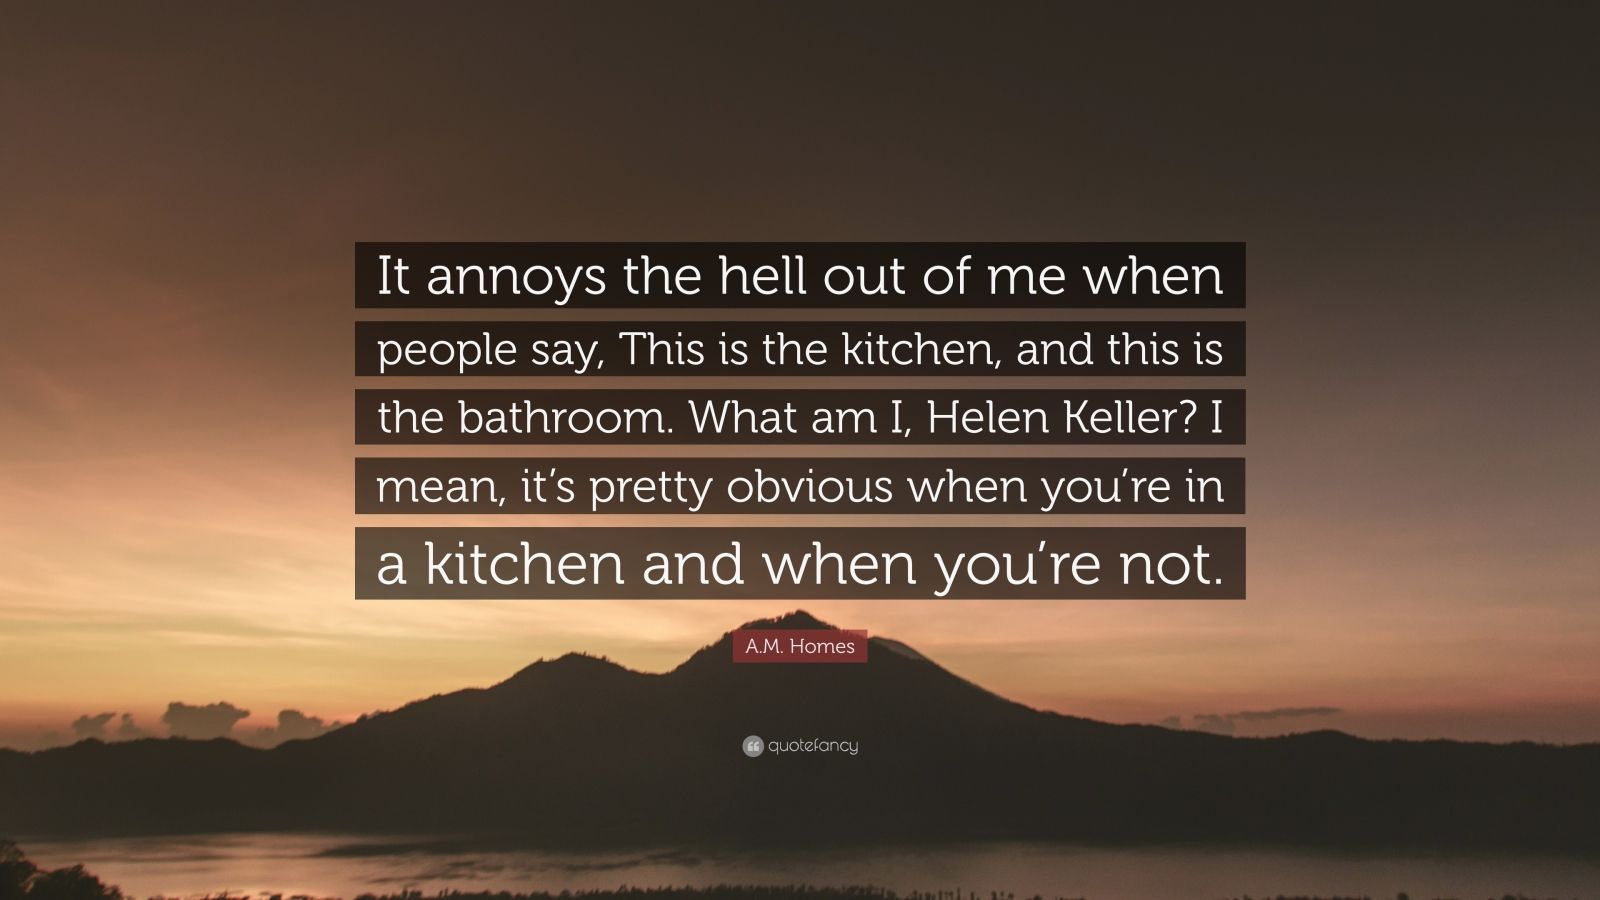 A.M. Homes Quote: “It annoys the hell out of me when people say, This ...
